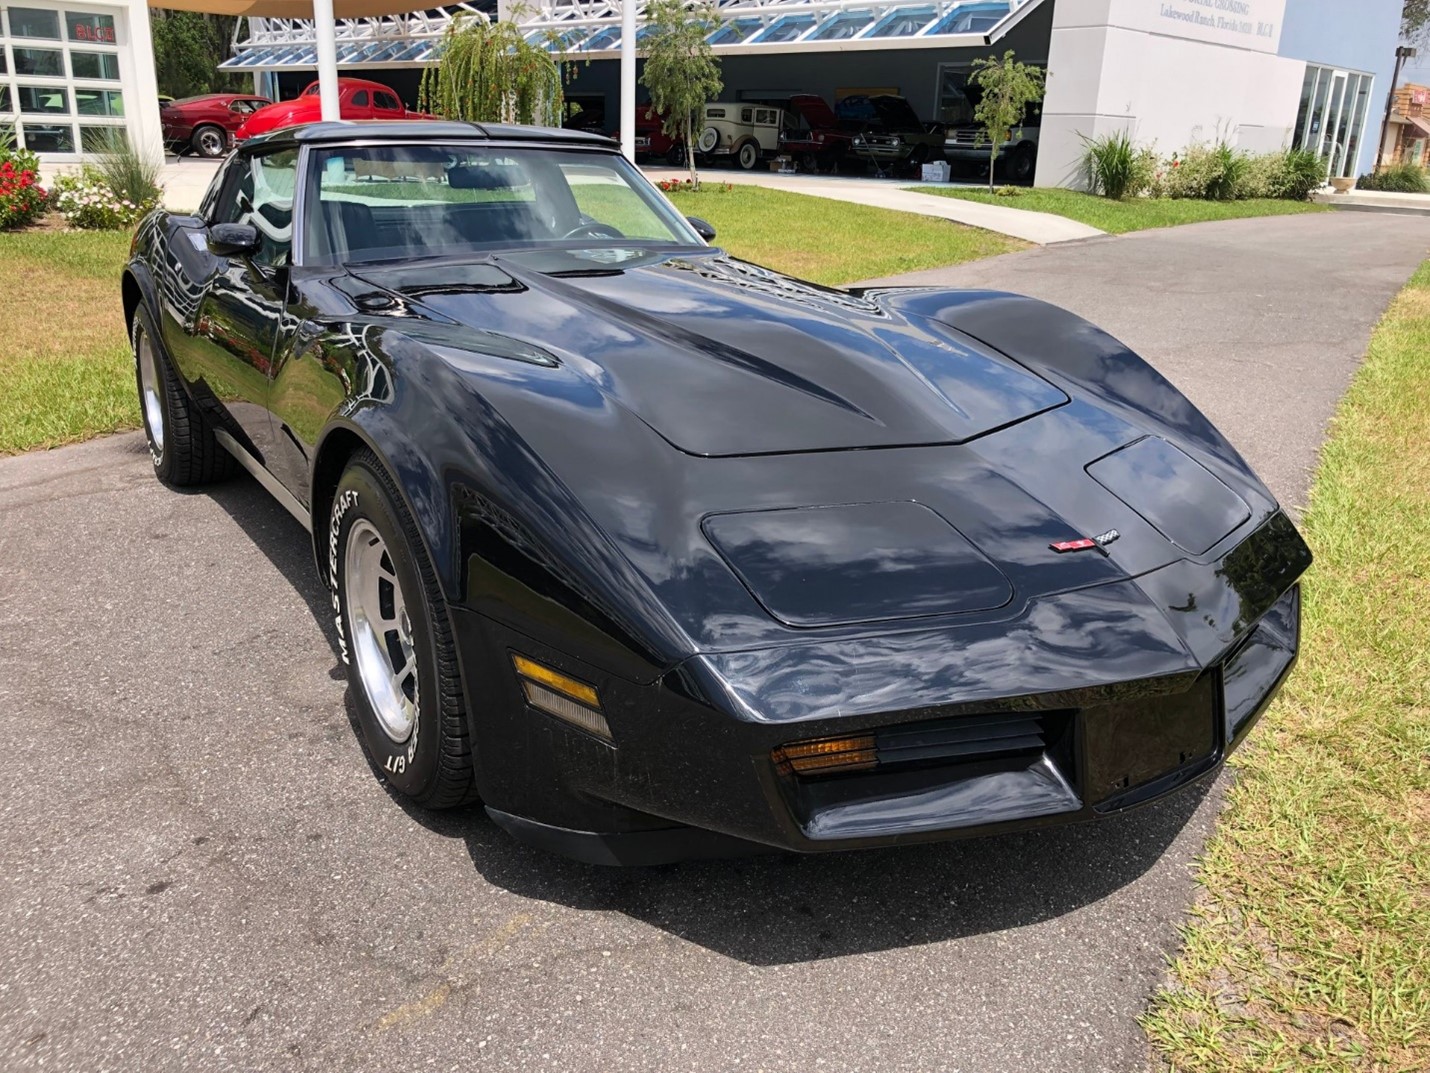 427Stingray.com is Heating Up with C3 Corvettes